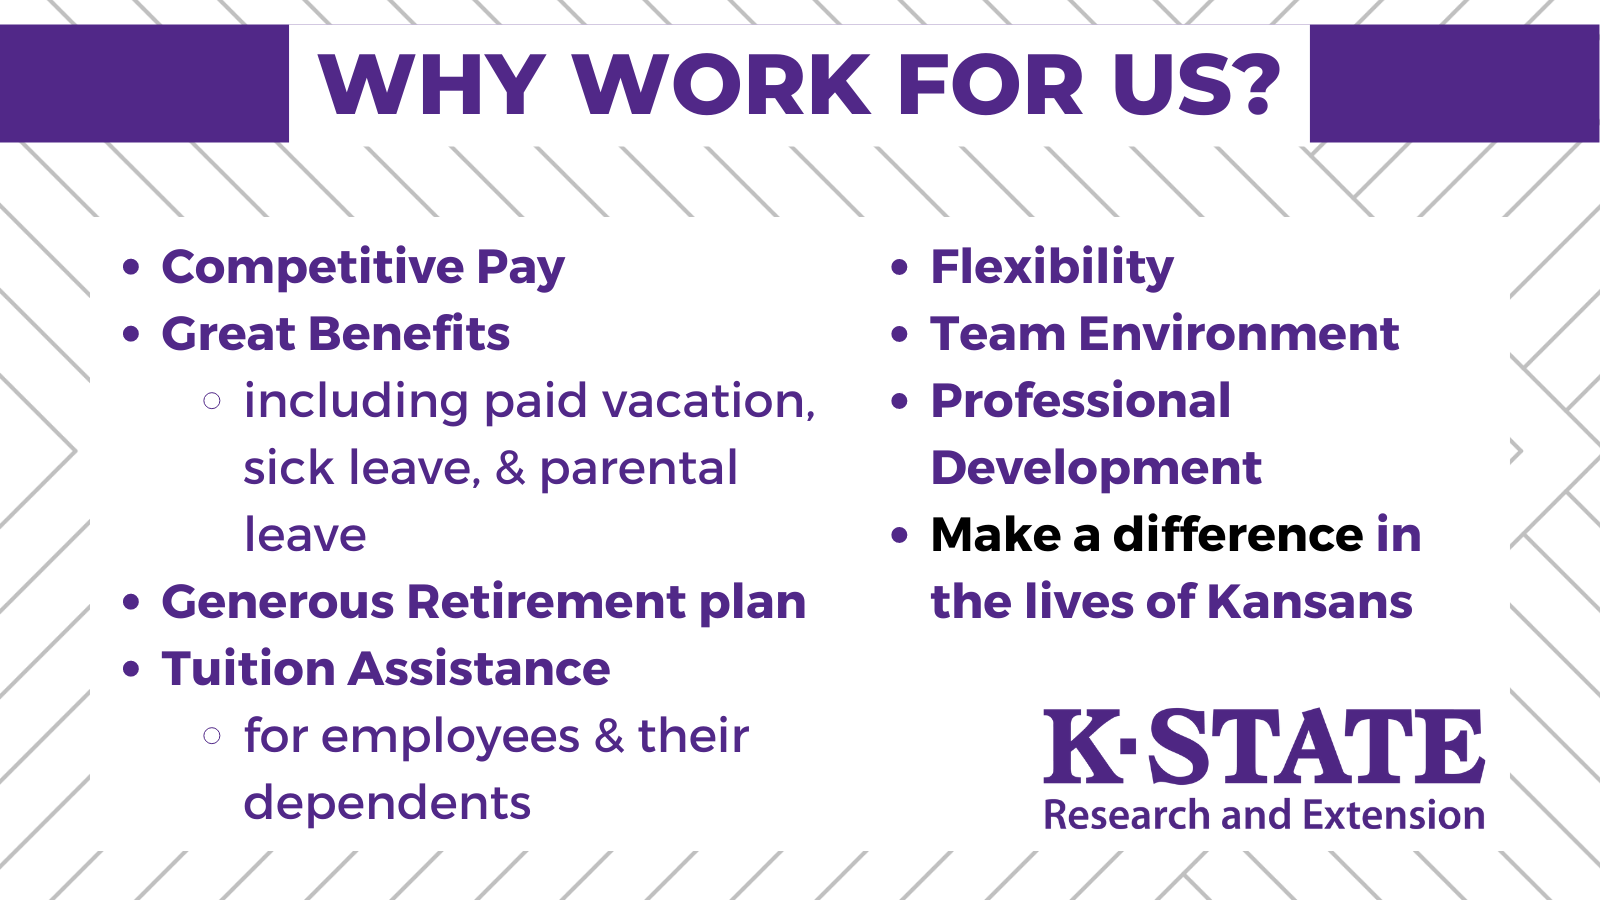 Why work for us? List: Competitive pay. Great benefits, including paid vacation, sick leave and parental leave.  Generous retirement plan.  Tuition Assistance for employees and their dependents.  Flexibility. Team Environment. Professional Development. Make a difference in the lives of Kansans.